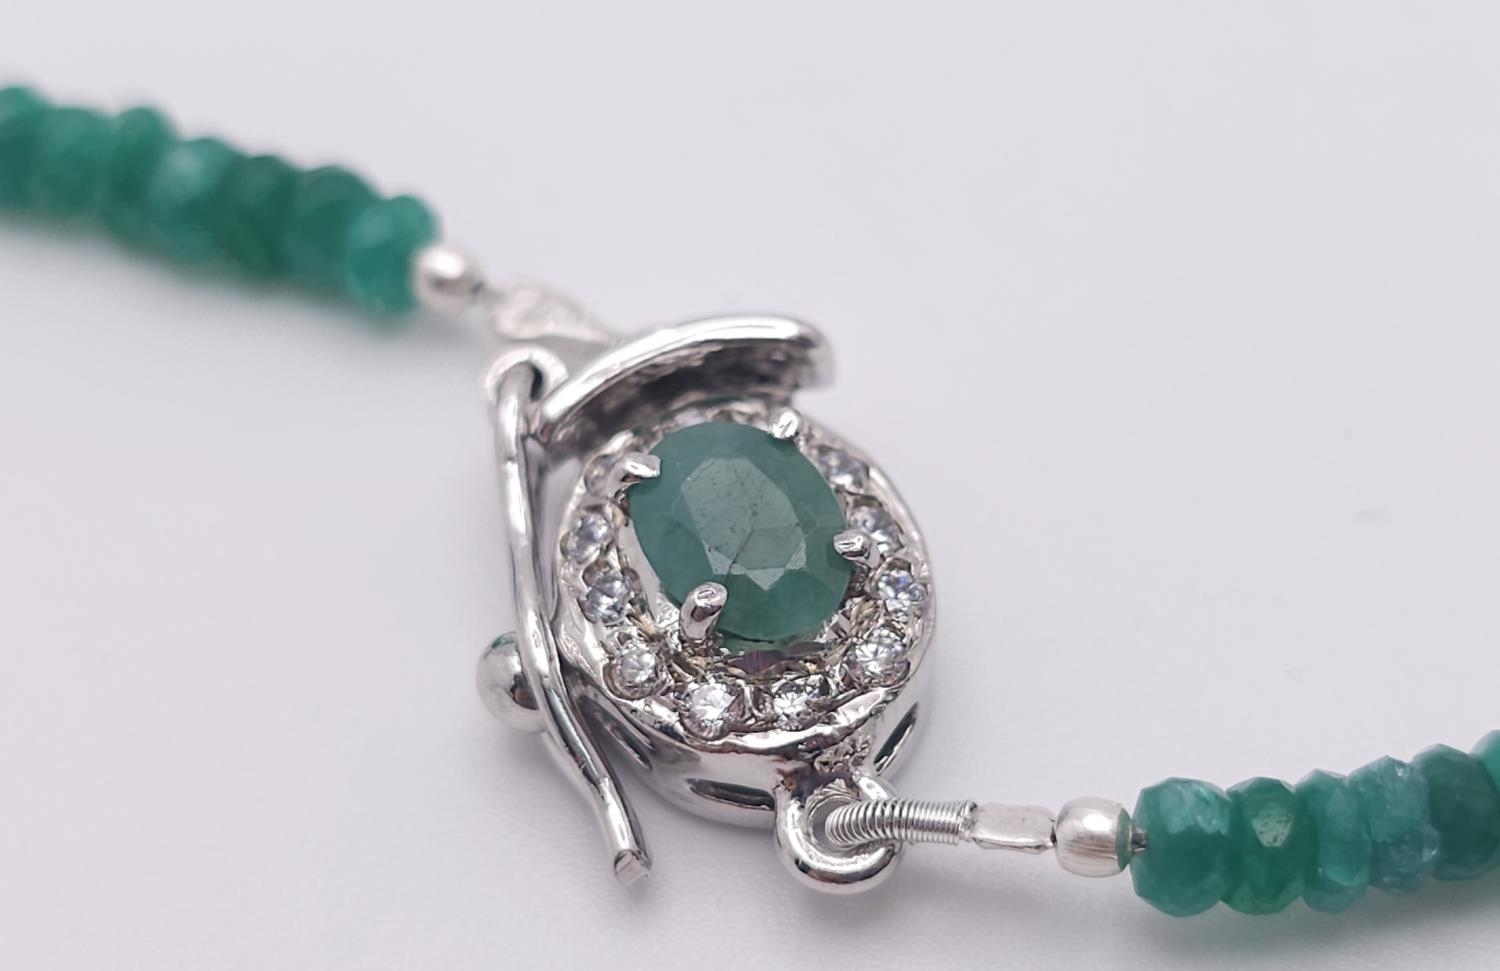 A 95ctw Emerald Gemstone Rondelle Single Strand Necklace - with Emerald and 925 Silver clasp. - Image 4 of 7